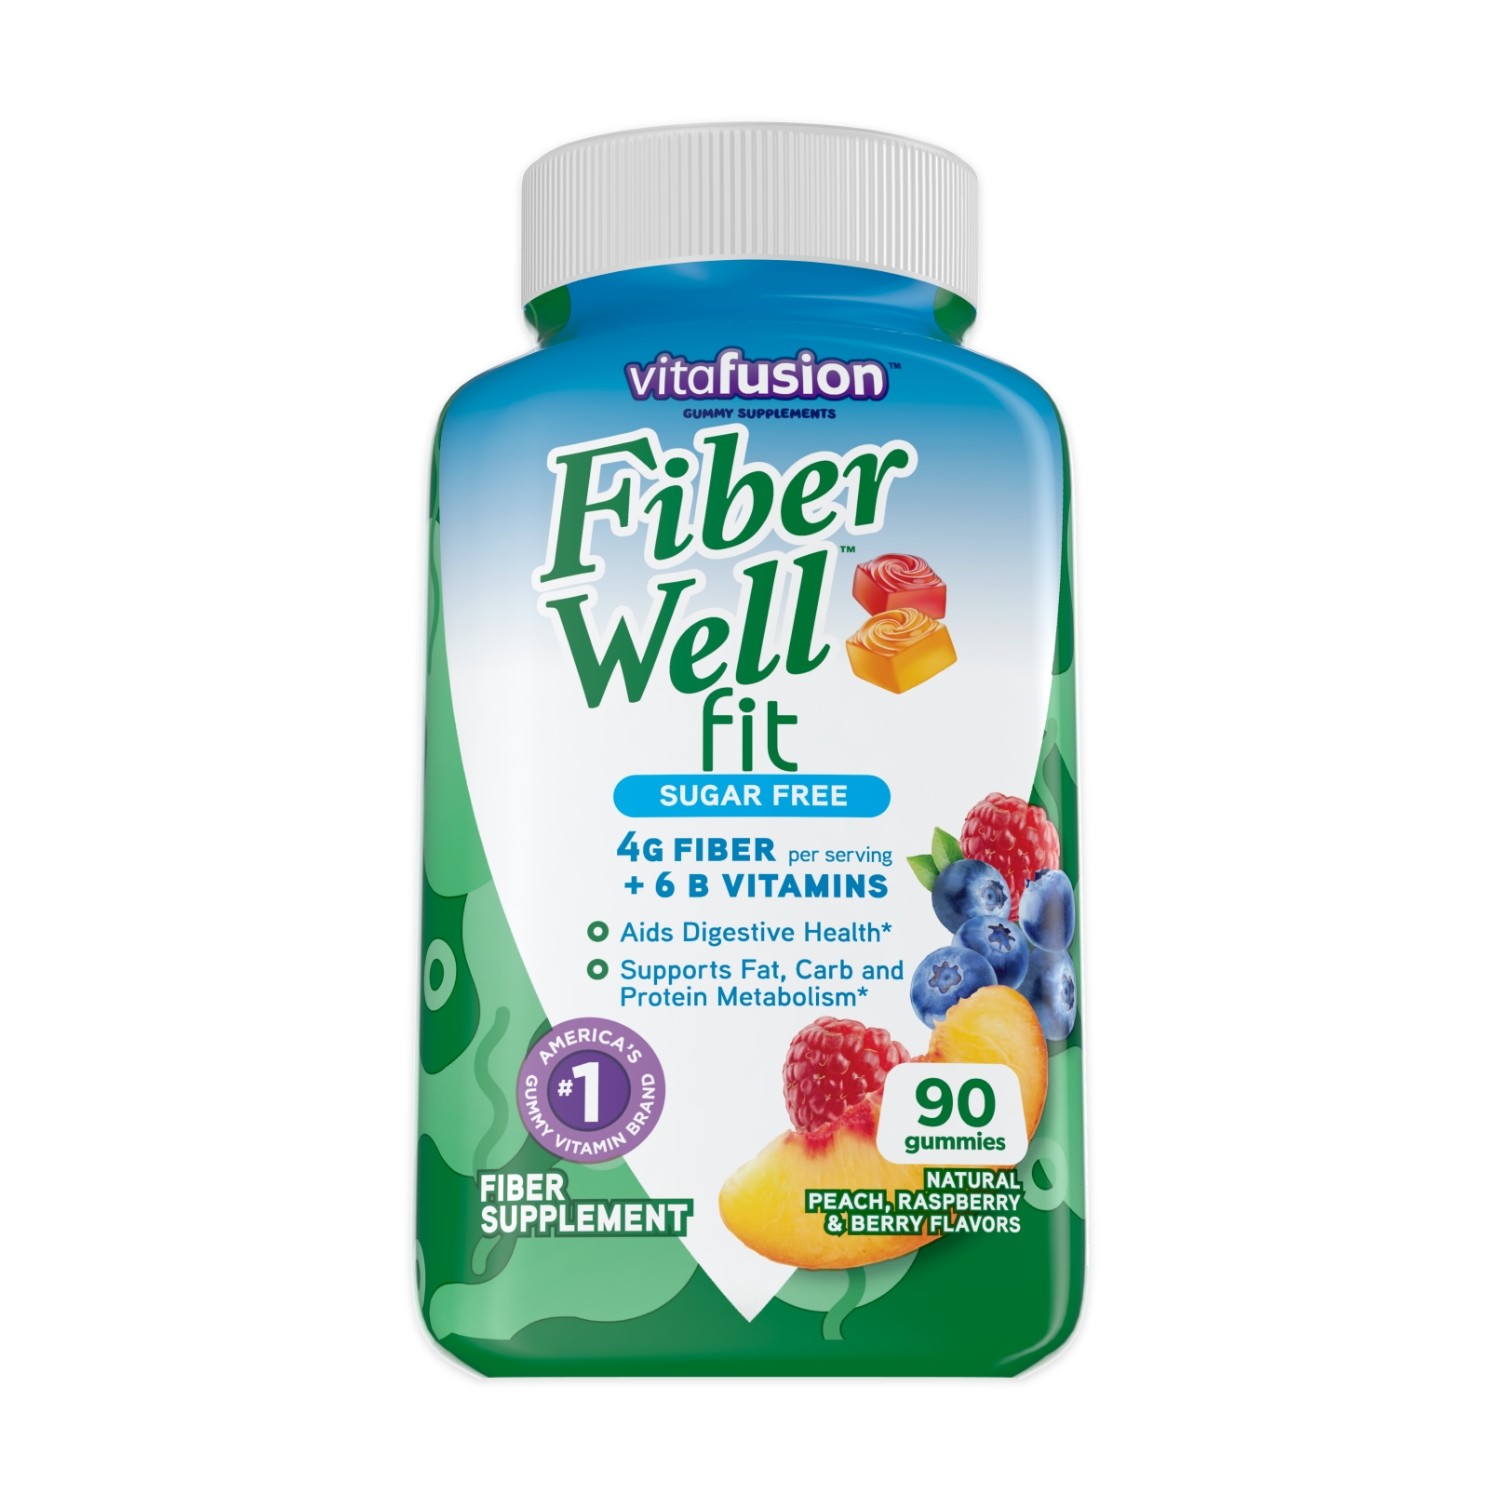 Vitafusion Fiber Well Fit Gummies Supplement, 90 Count (Packaging May Vary) - image 1 of 8